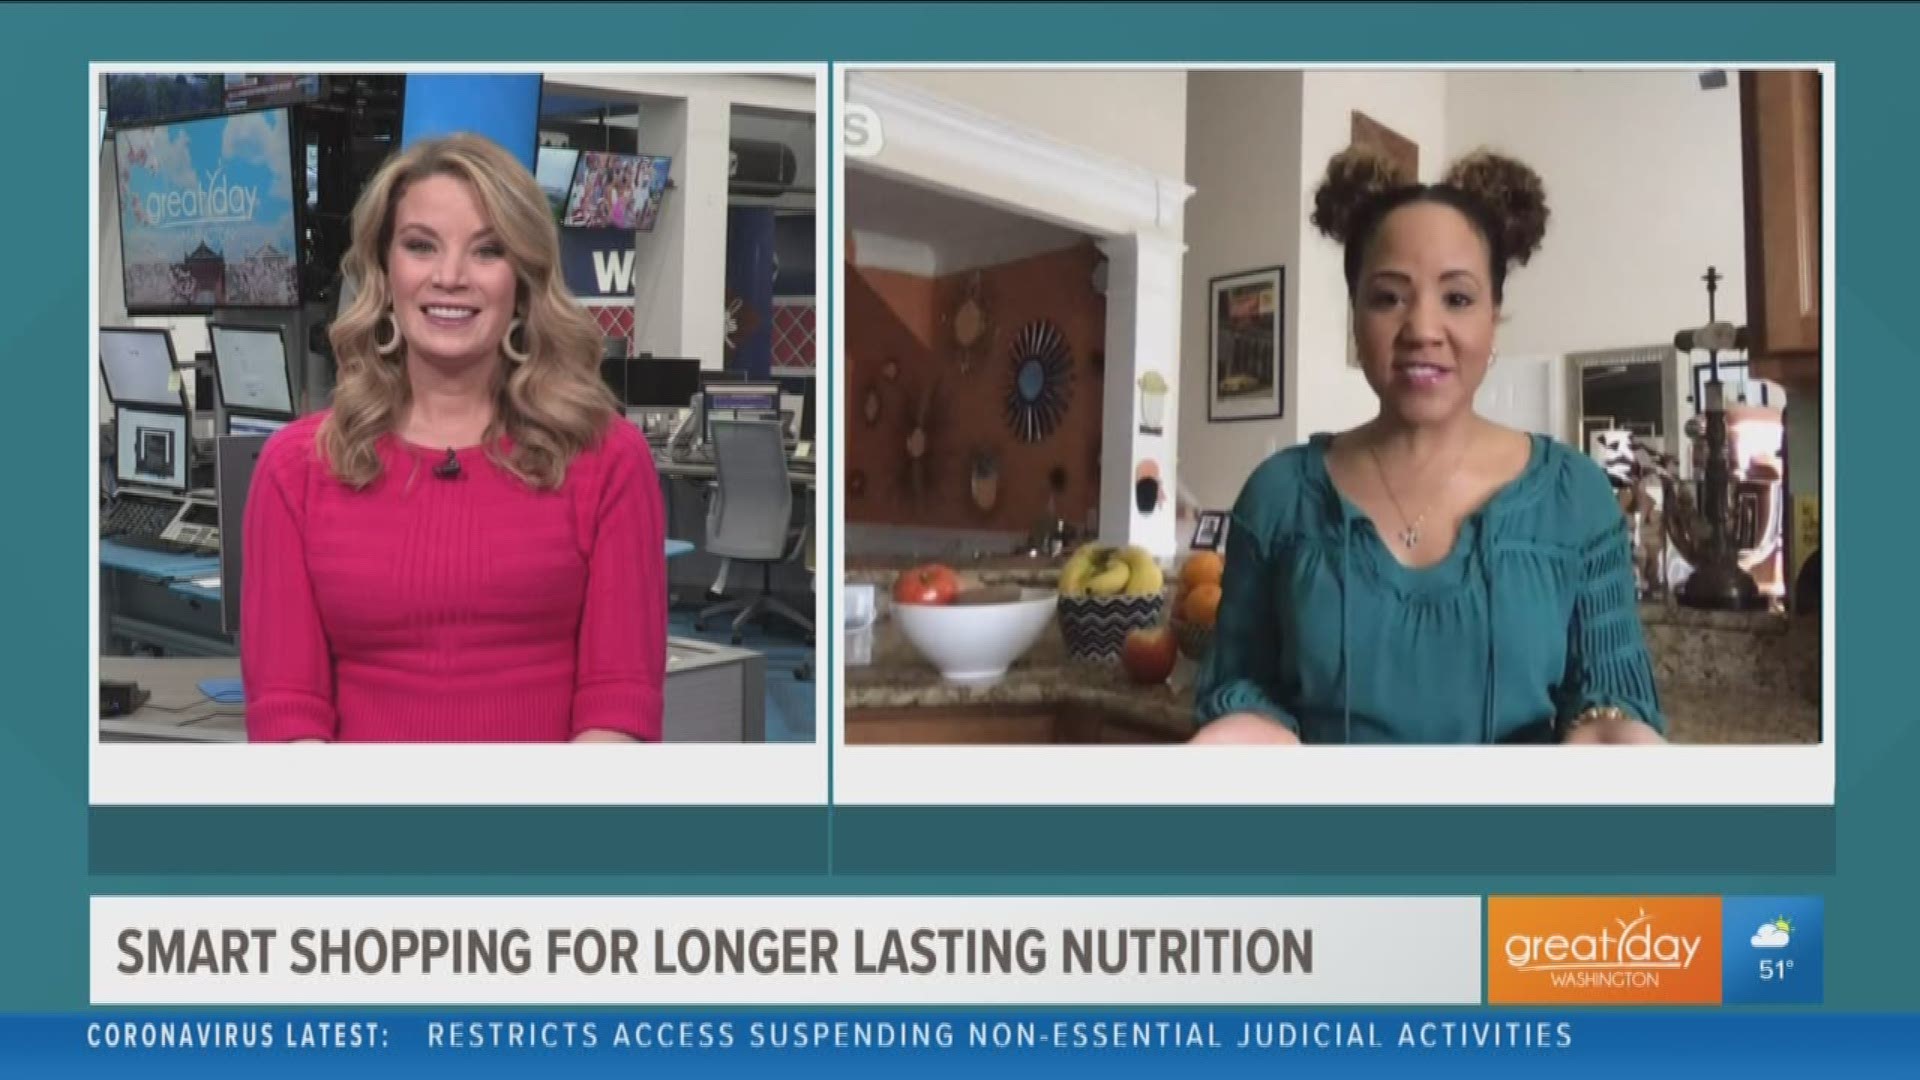 TV host and chef Bren Herrera shares her top choices for long lasting food options while spending more time at home.